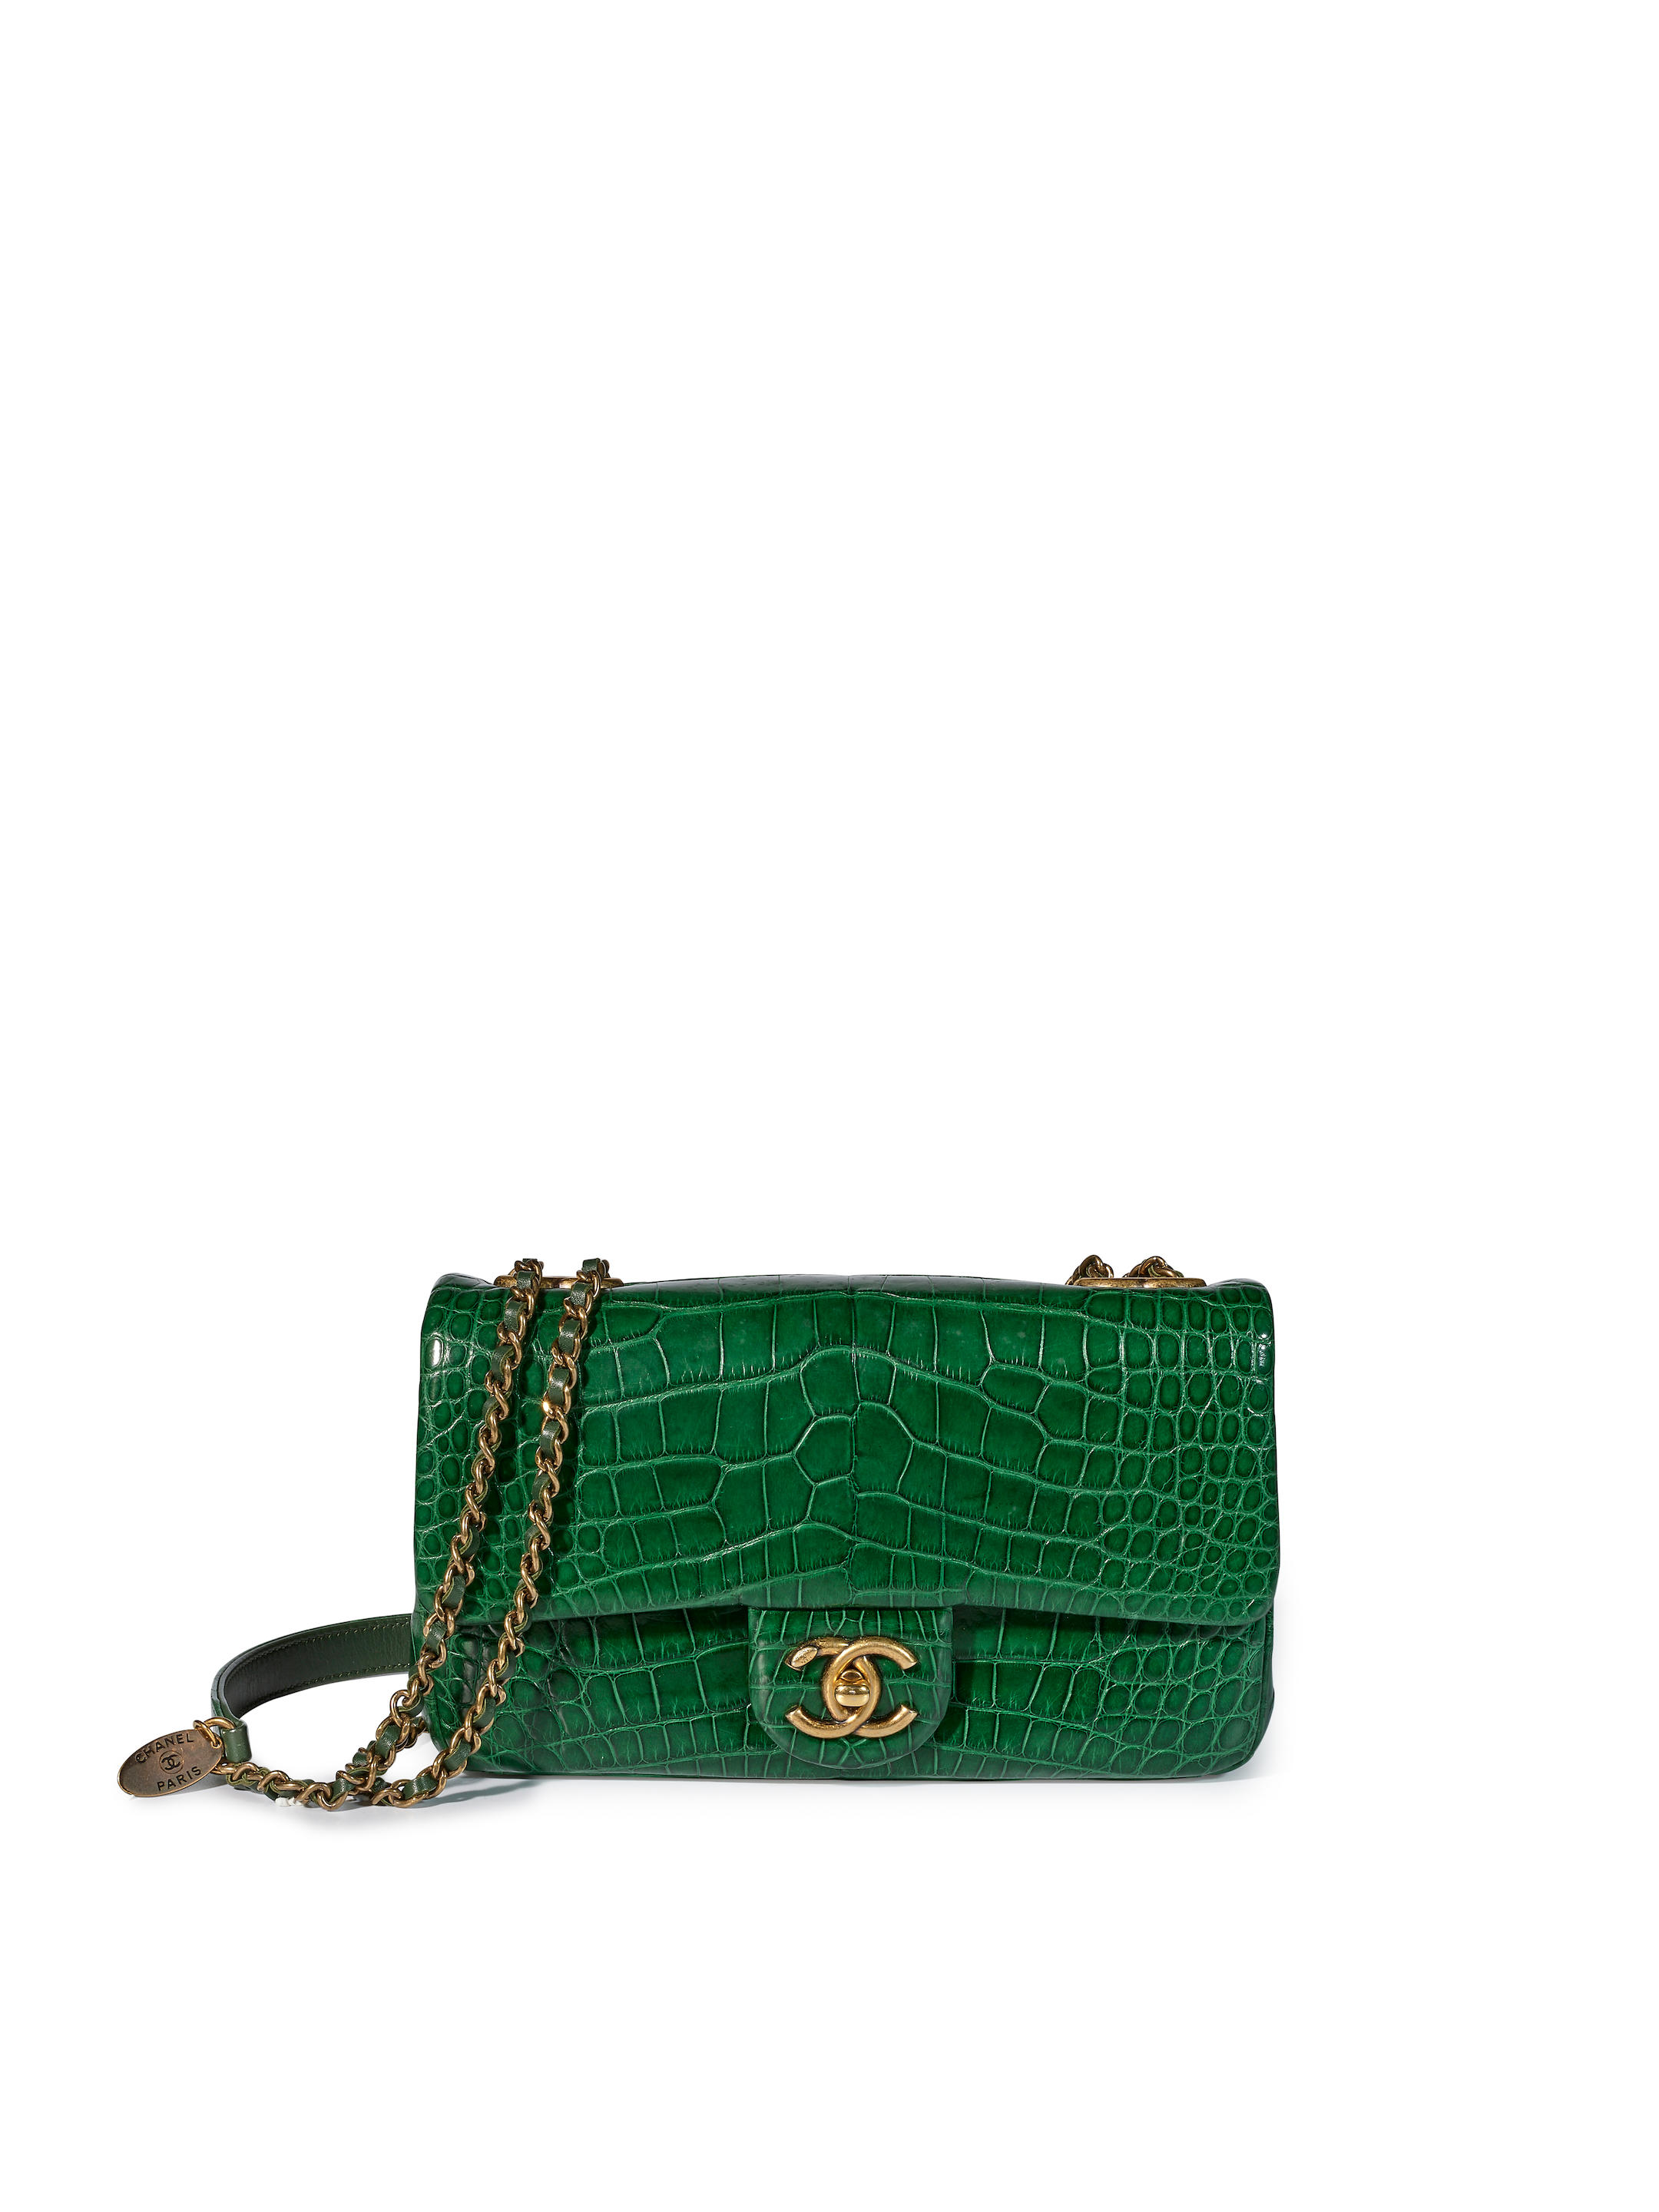 Bonhams : CHANEL EMERALD GREEN SHINY ALLIGATOR CLASSIC CHAIN BAG WITH  ANTIQUE GOLD TONED HARDWARE 2015-2016 (Includes authenticity card and  original dust bag)